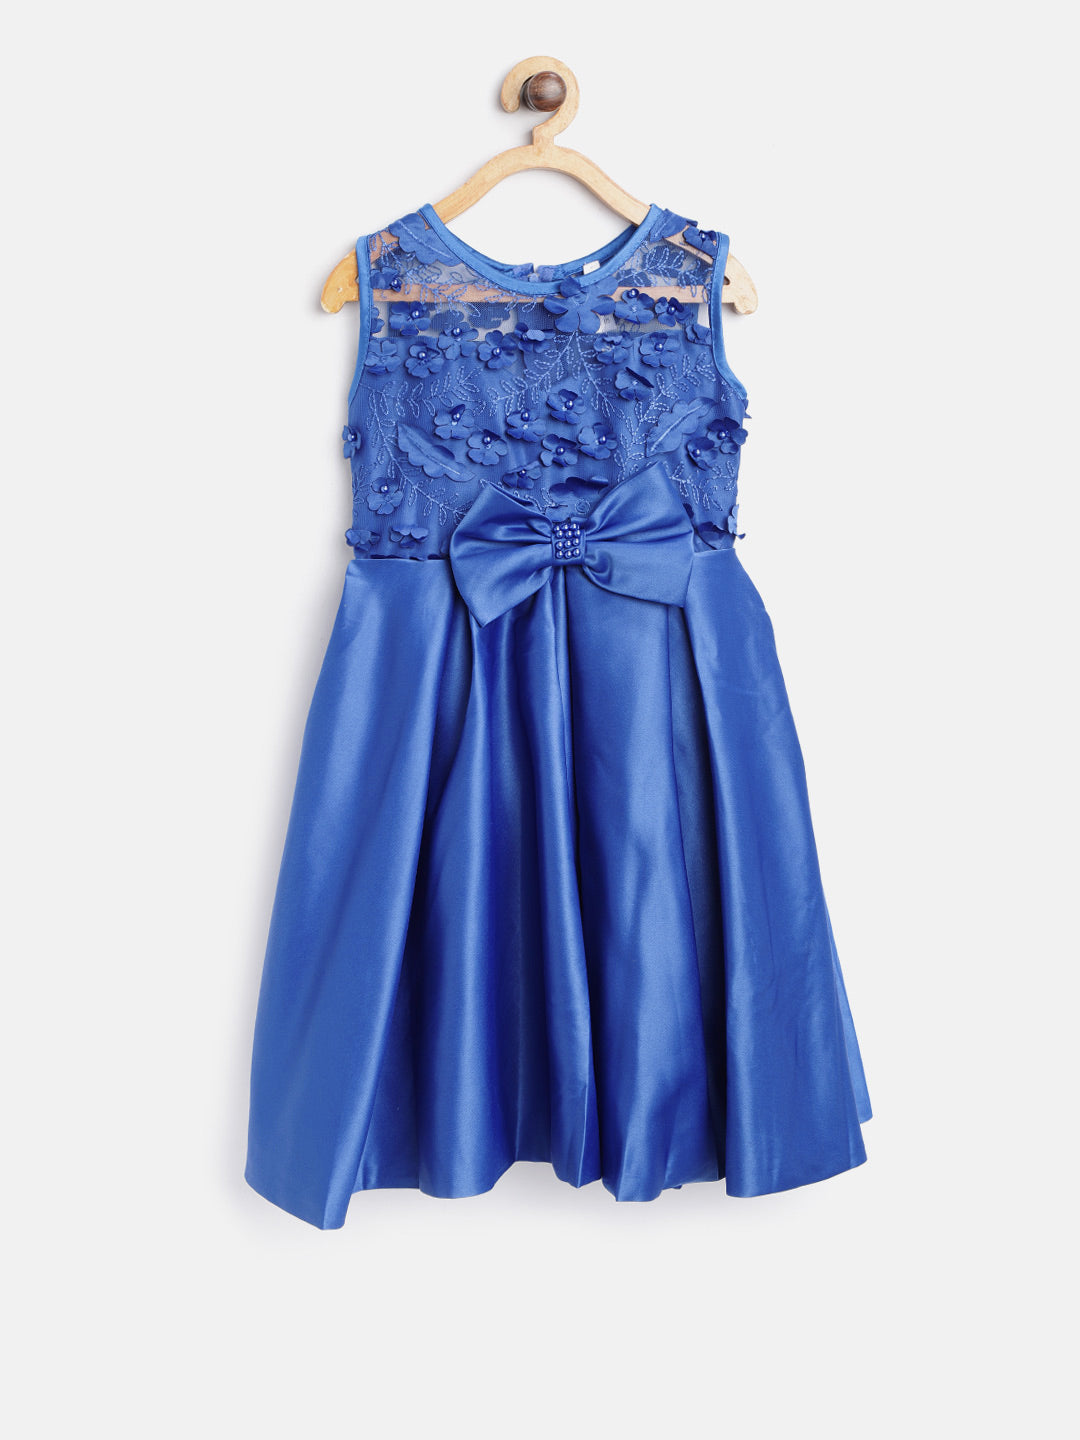 Gilr's Peach Pearls And Roses Embellished Party Dress - StyleStone Kid